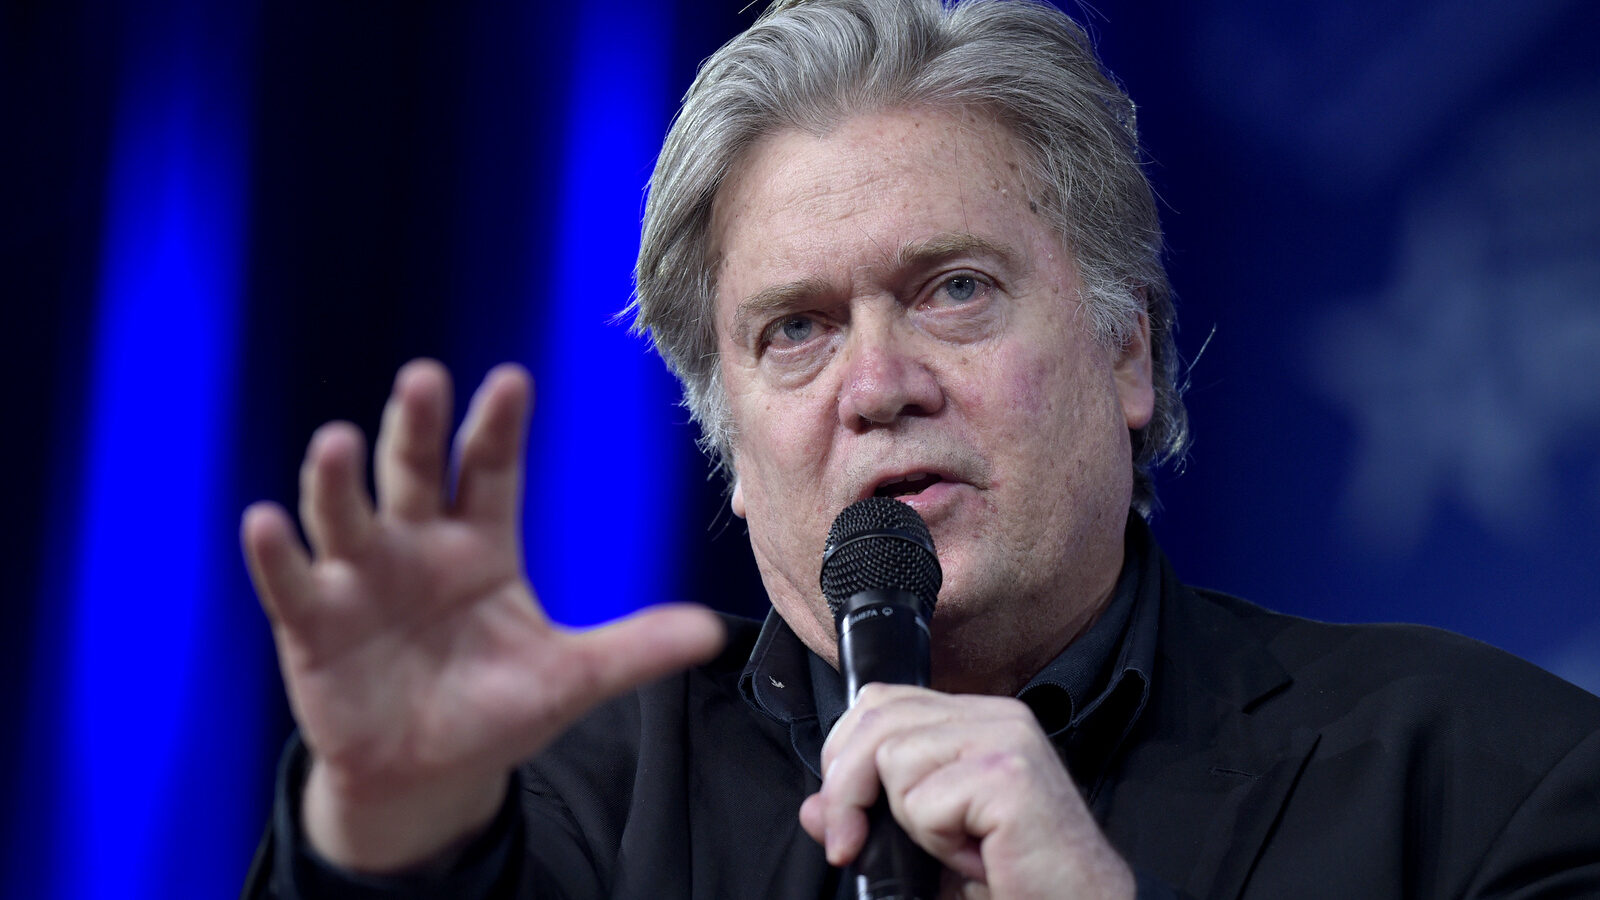 White House strategist Stephen Bannon speaks during the Conservative Political Action Conference (CPAC) in Oxon Hill, Md., Thursday, Feb. 23, 2017. (AP/Susan Walsh)